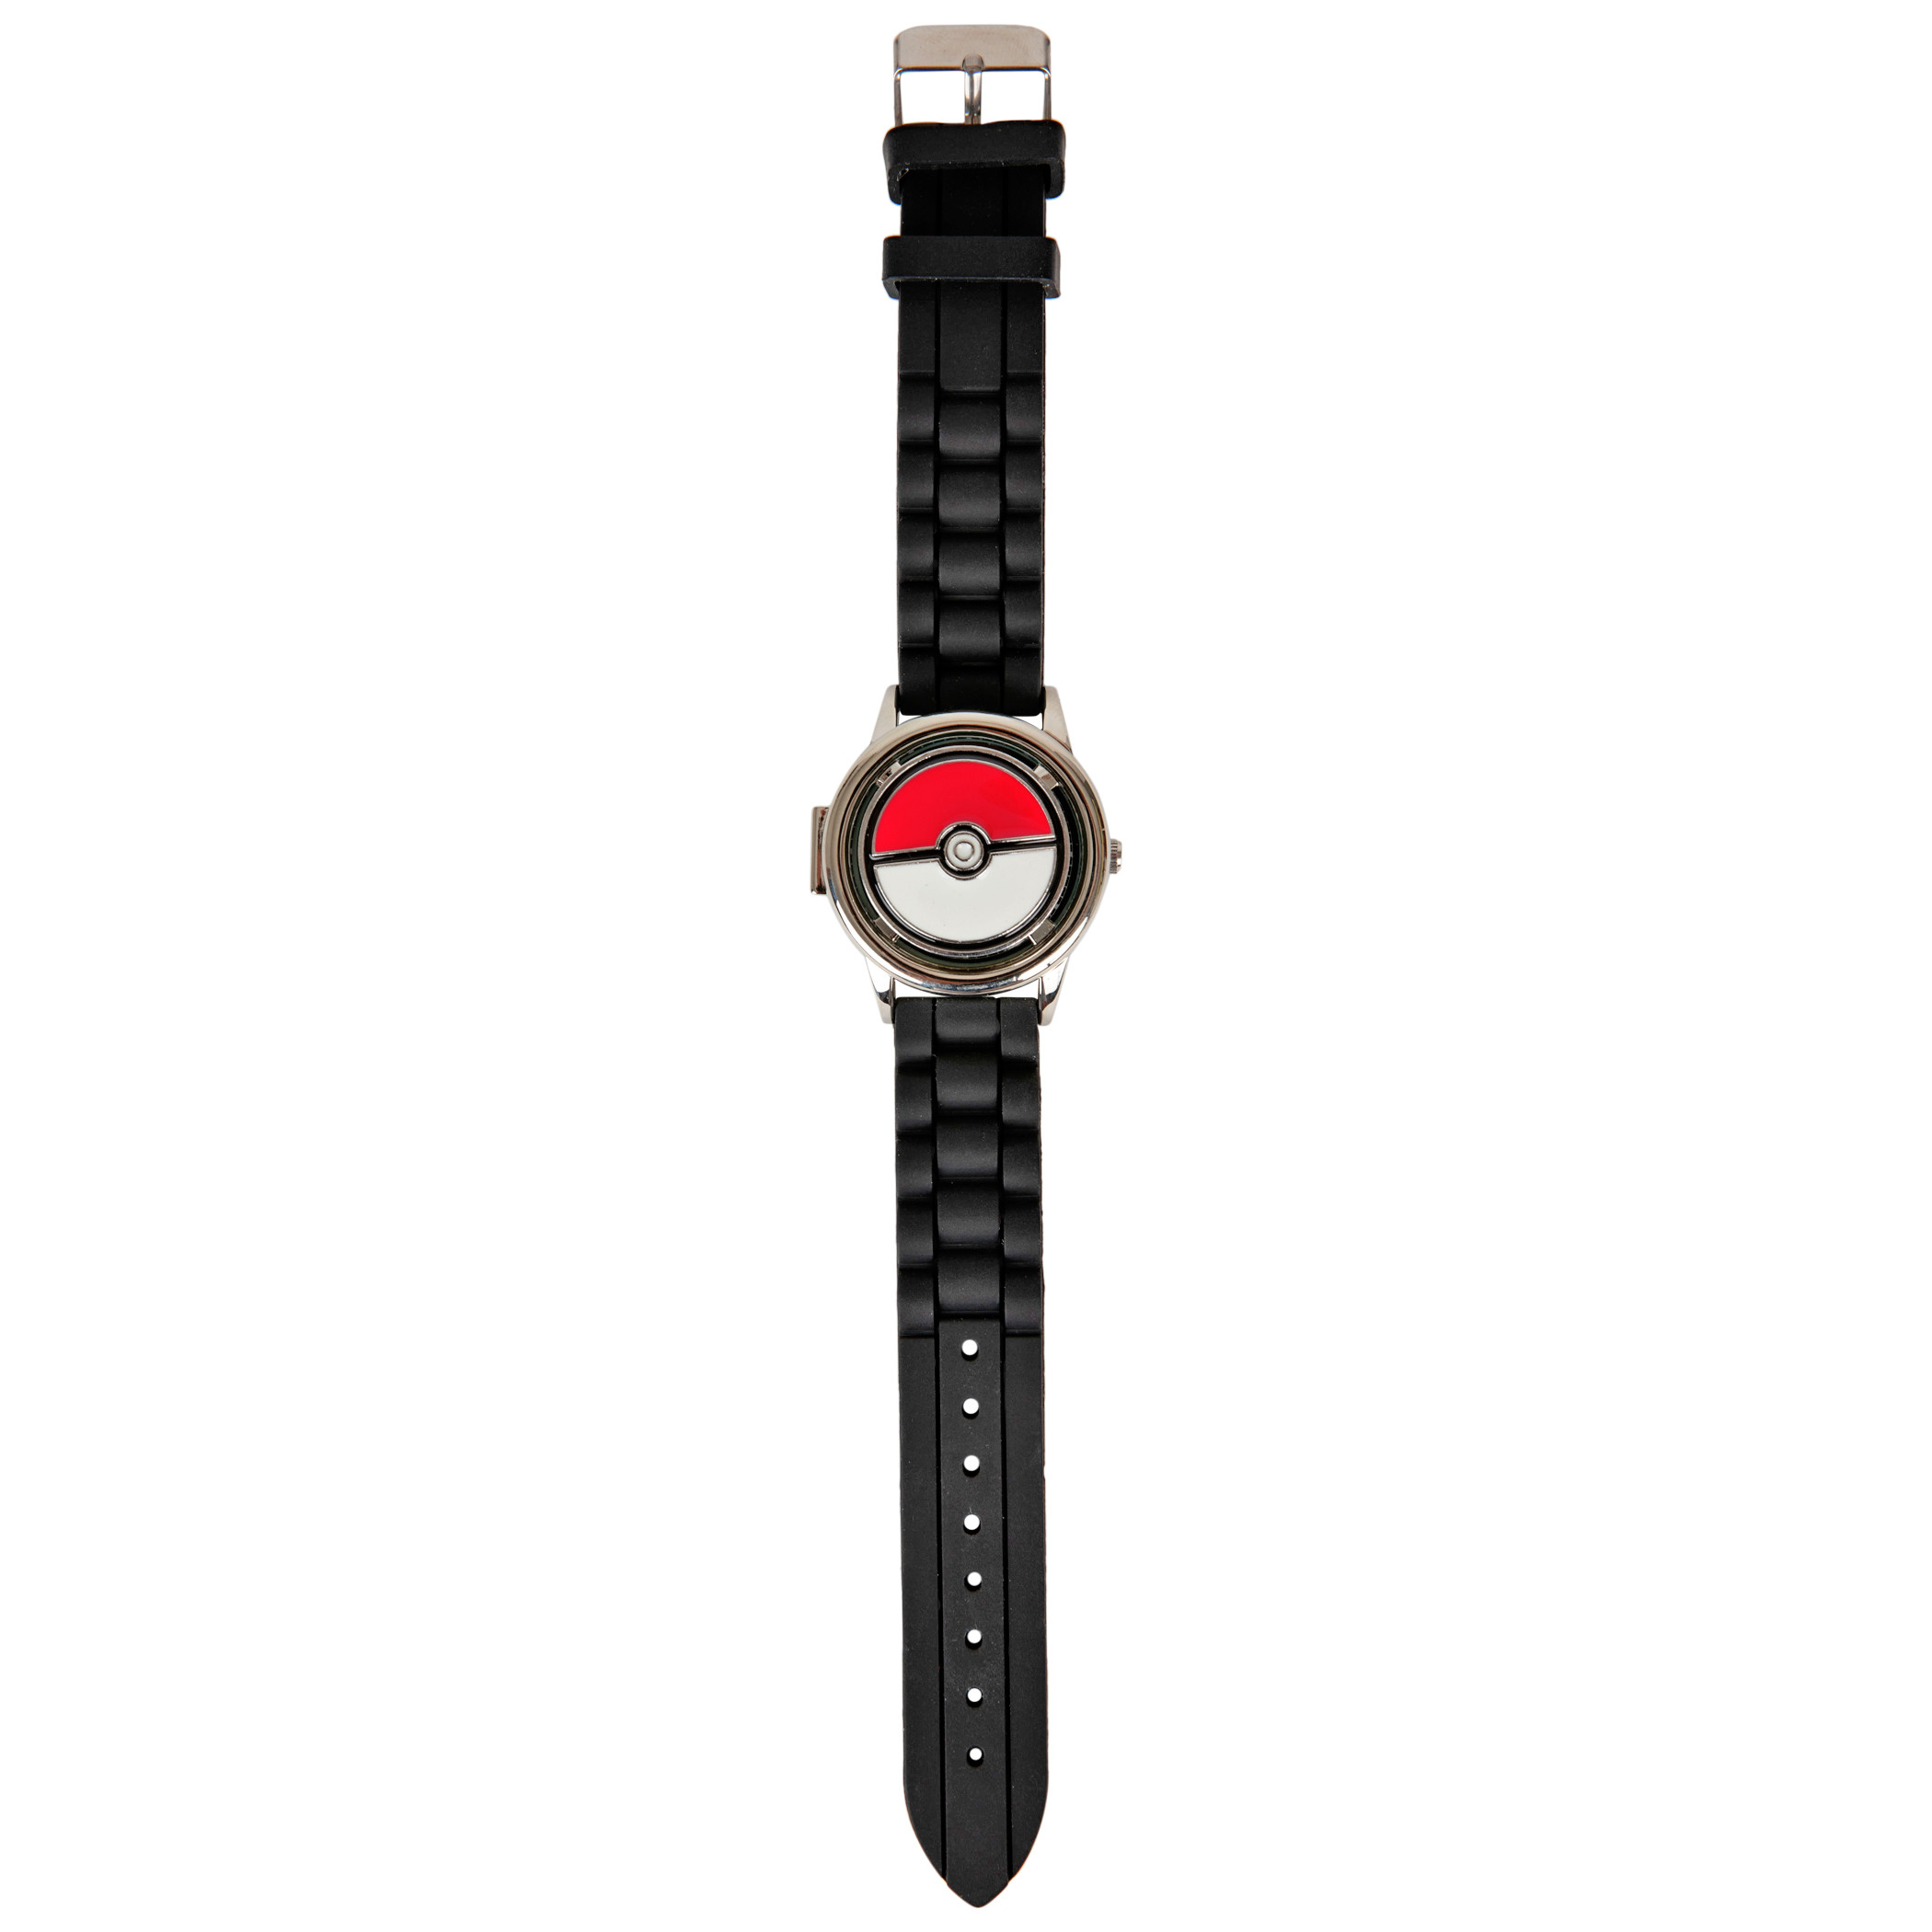 Pokémon Ball with Pikachu Spinner Watch with Rubber Straps